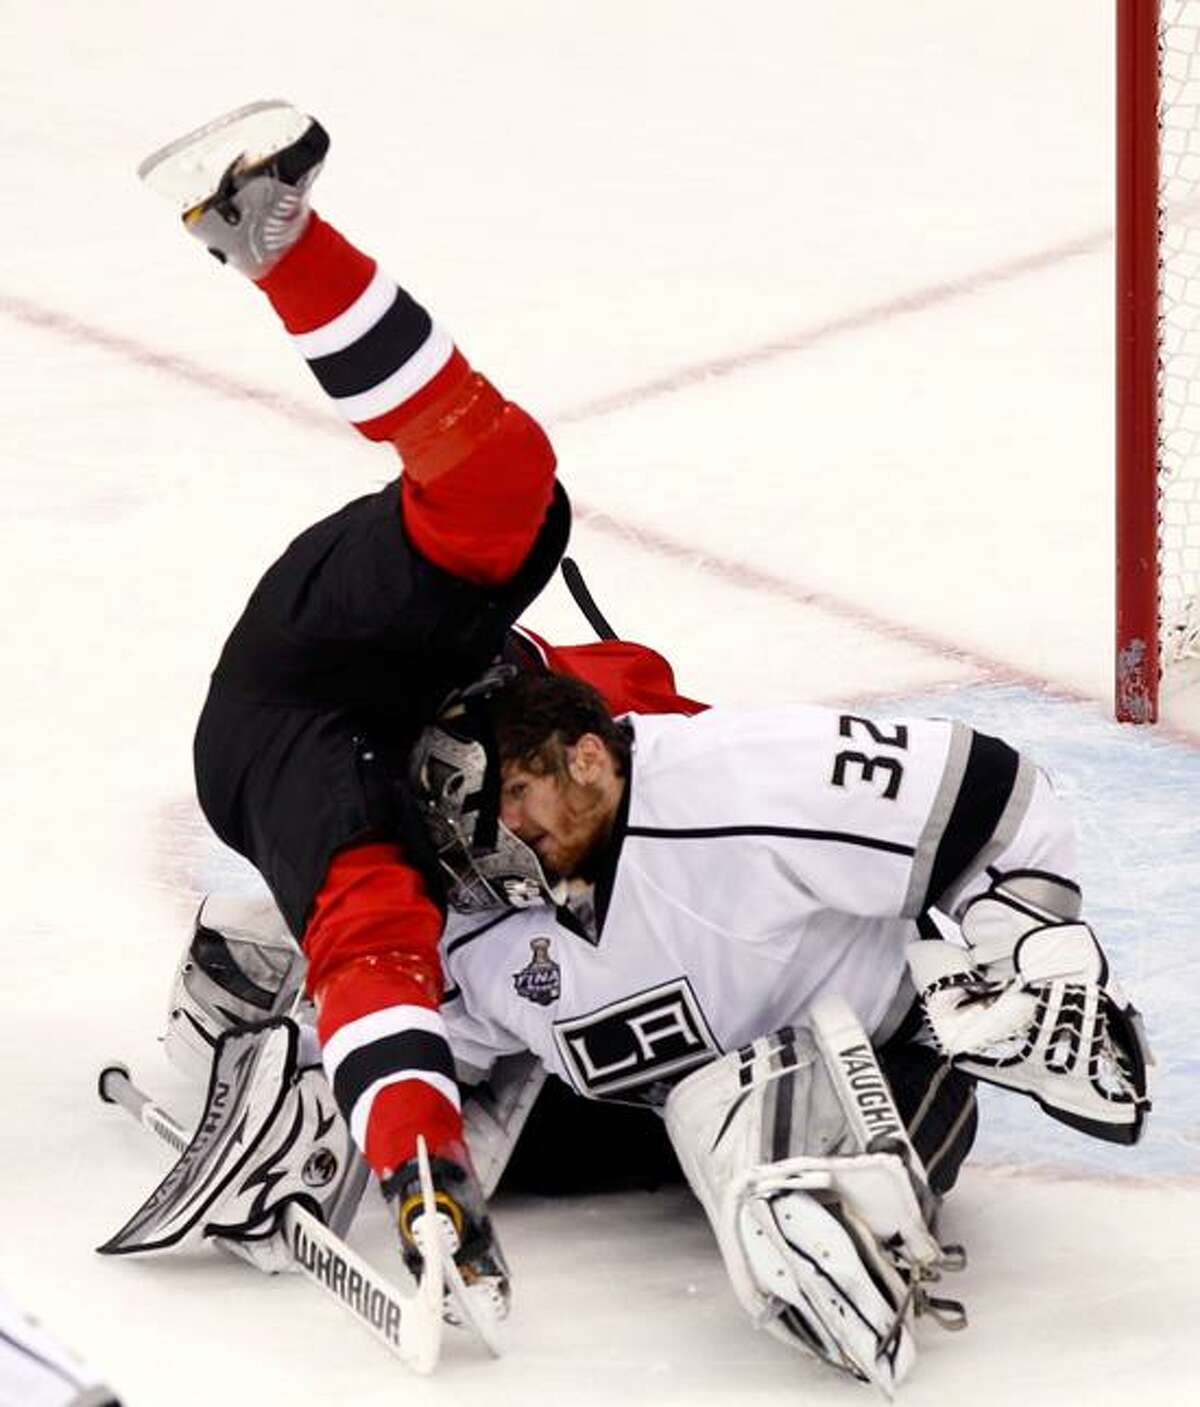 NHL: Stanley Cup Finals Game Two - Los Angeles Kings at New Jersey Devils